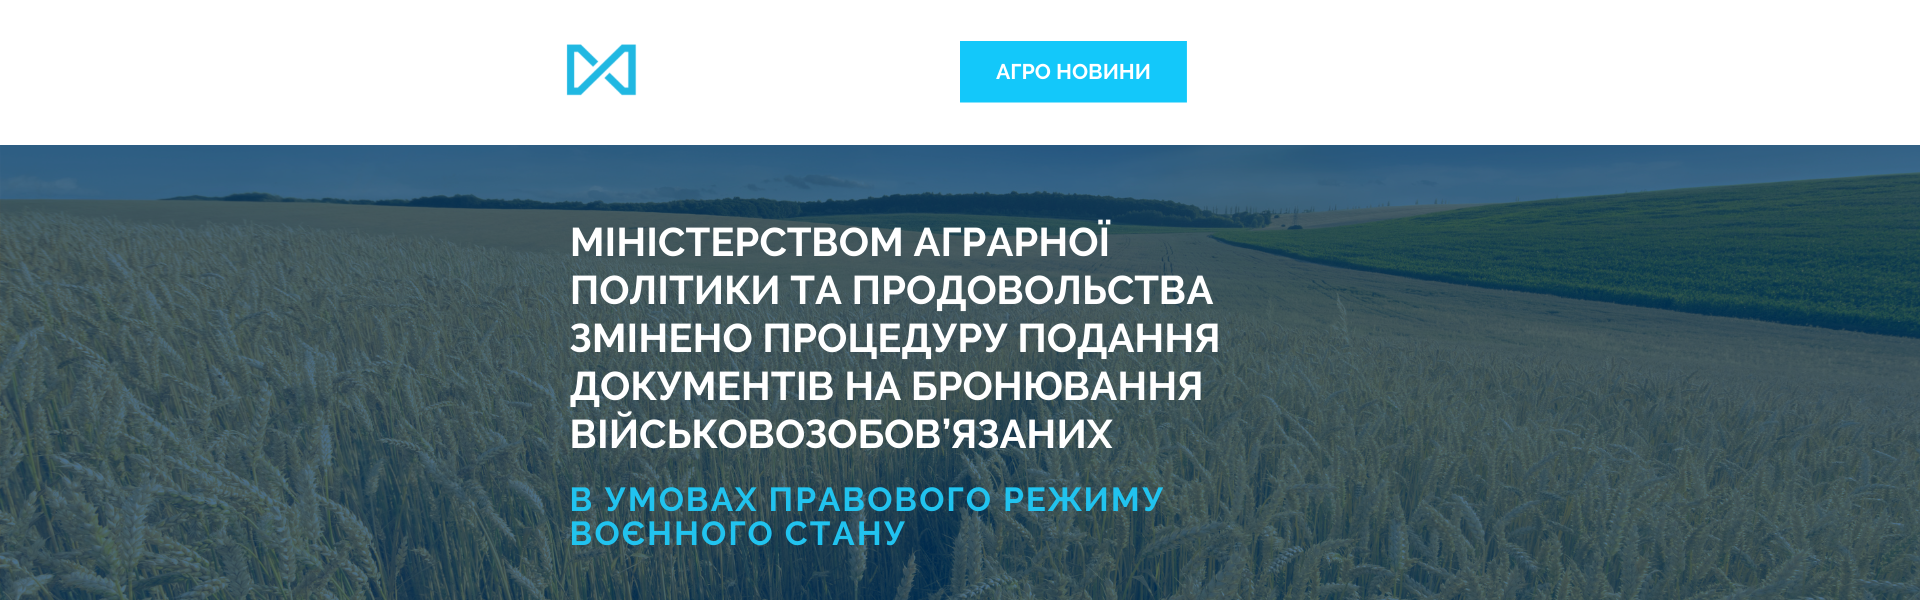 The Ministry of Agrarian Policy and Food has updated the procedure for submitting documents for the reservation of conscripts